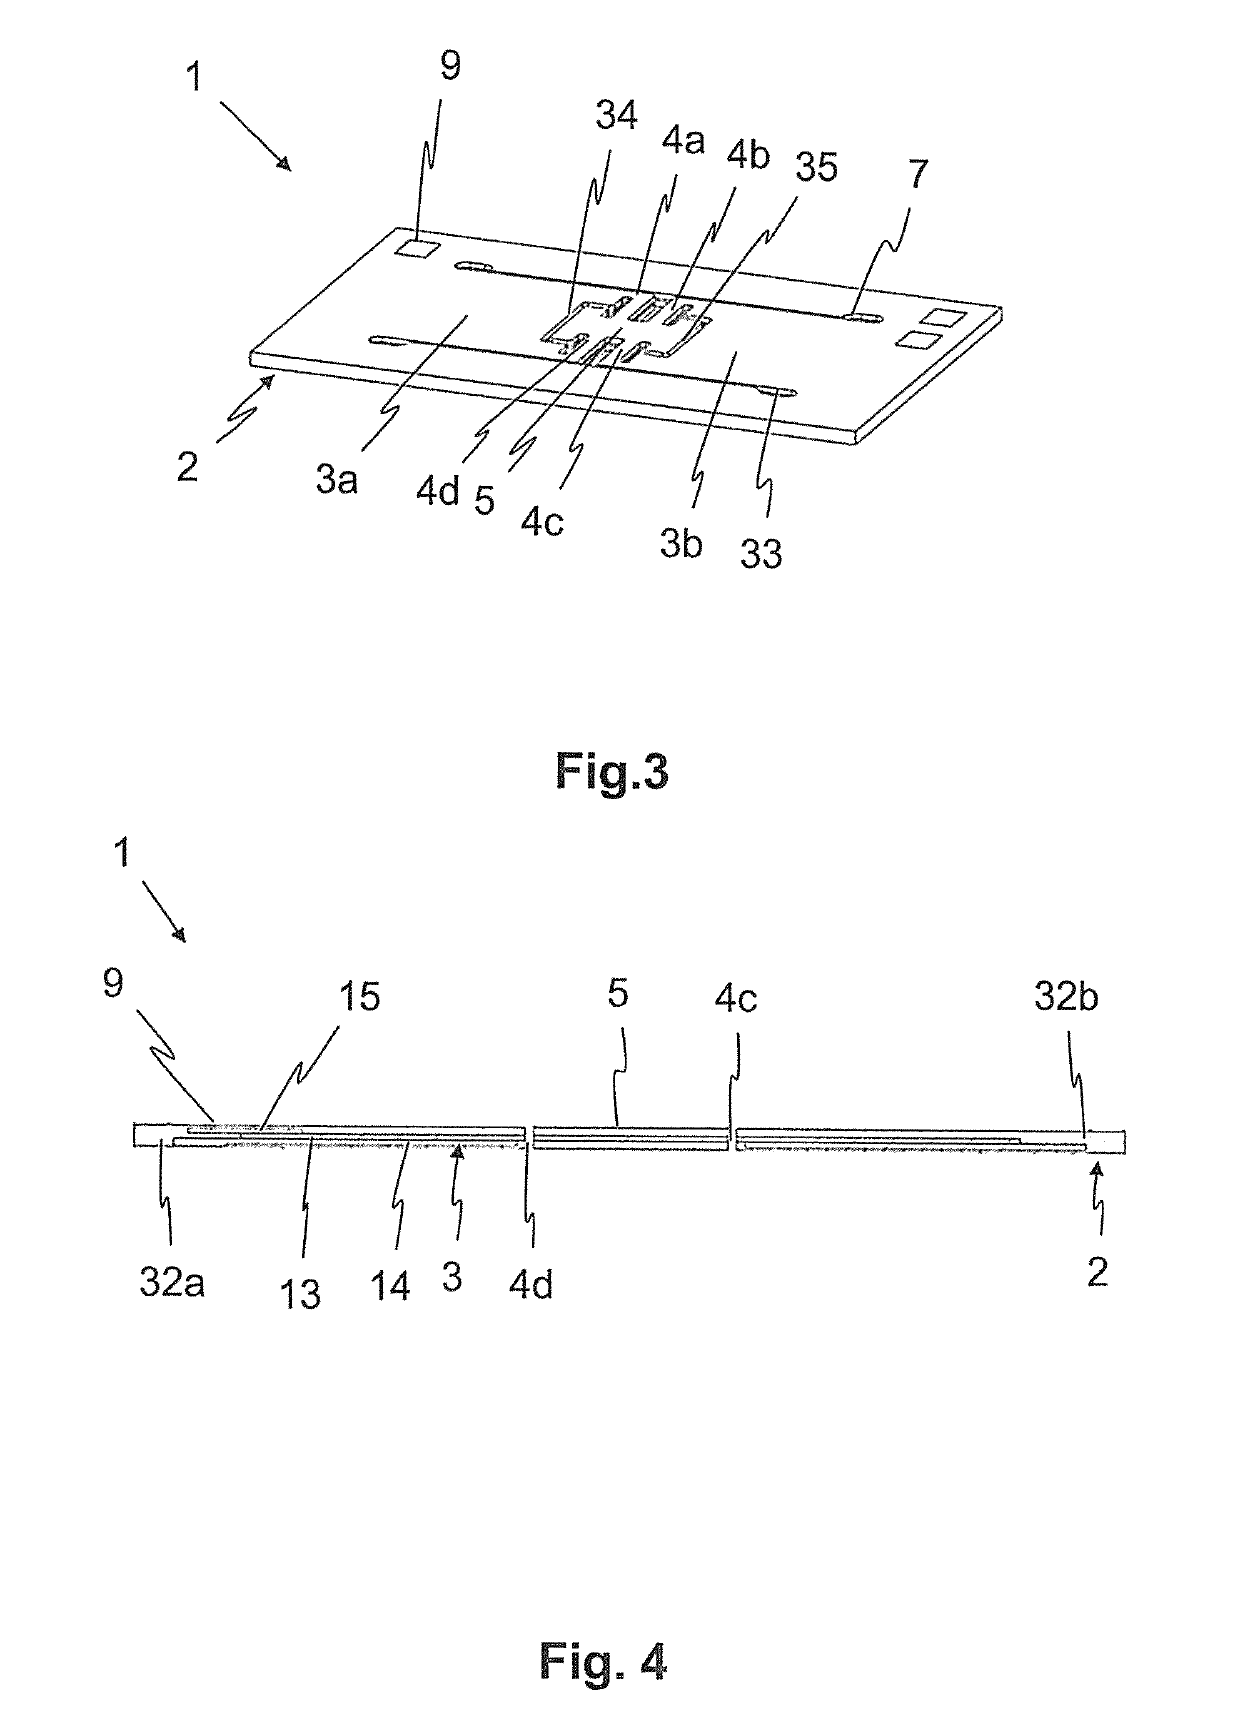 Flexible MEMS printed circuit board unit and sound transducer assembly